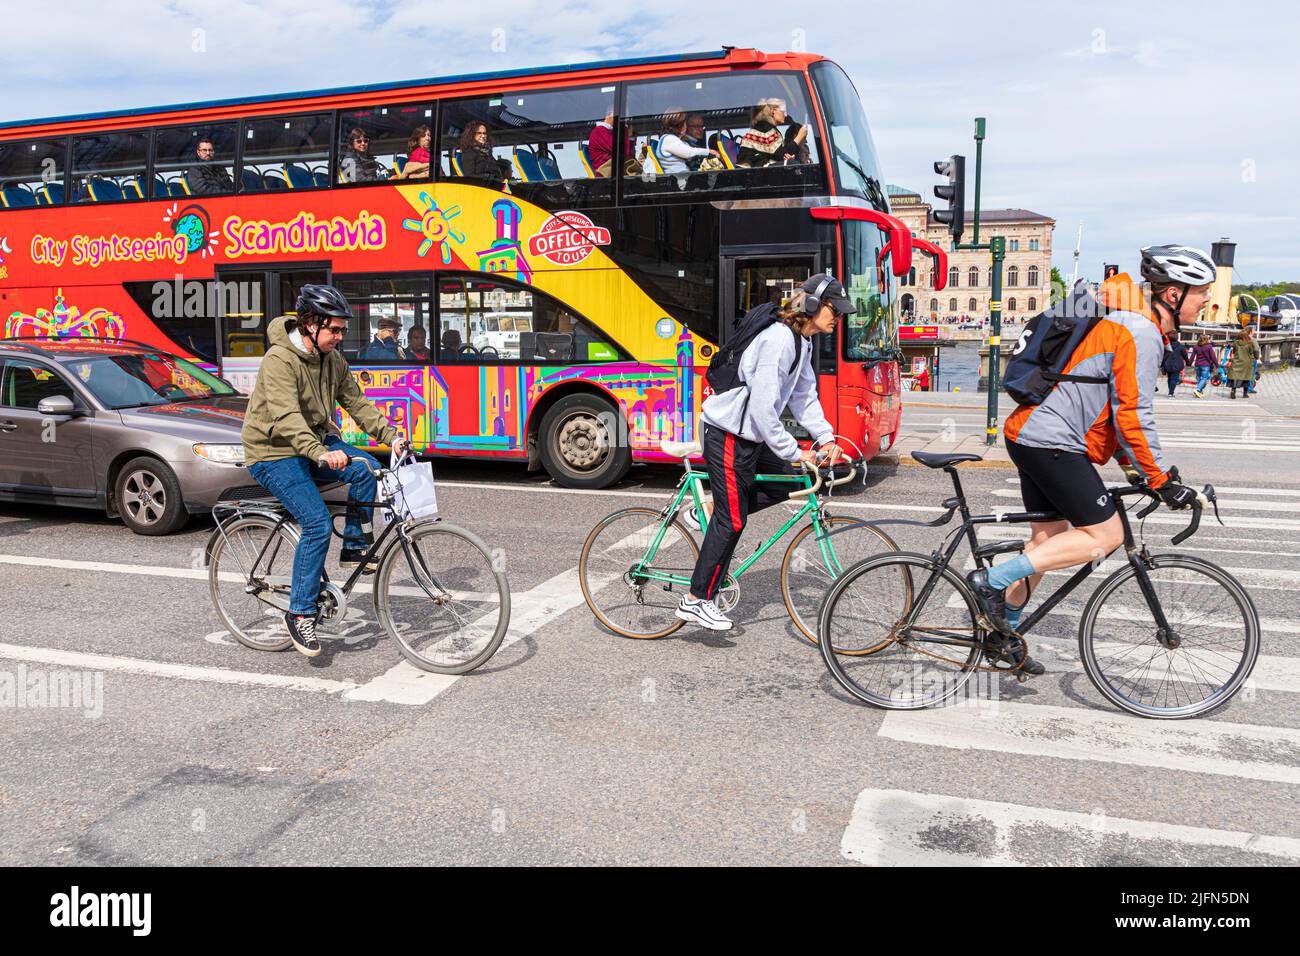 Cyclists and a sightseeing tour bus in Skeppsbron, central Stockholm, Sweden Stock Photo